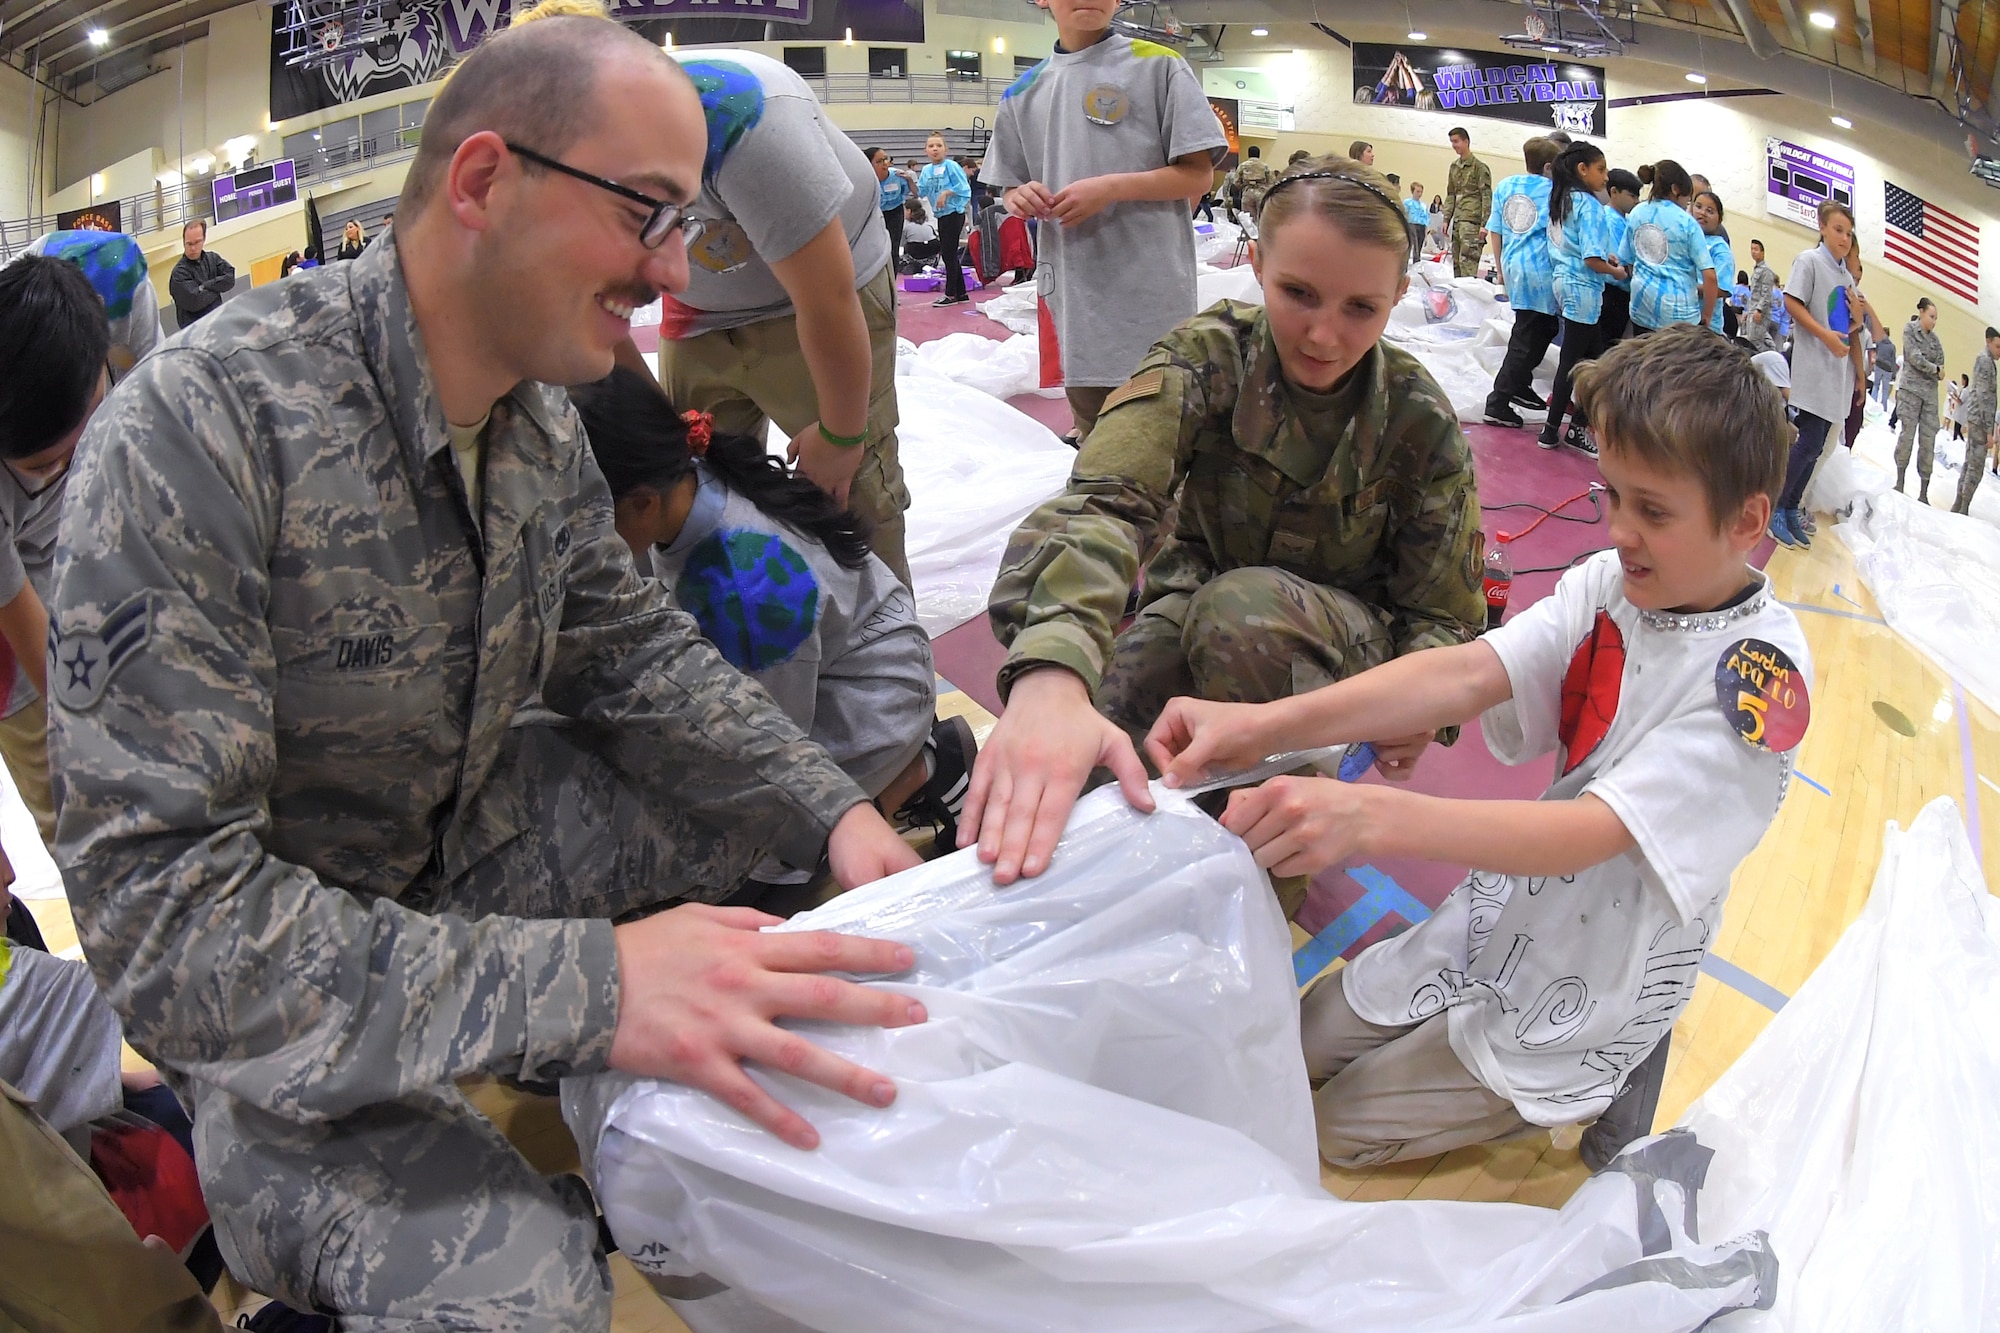 (Left to right) Airman 1st Class Zack Davis and Senior Airman Ashley Carey, both 649th Munitions Squadron, assist a fifth grade student with building a simulated space habitat during ‘Mission to Mars’ at Weber State University May 2, 2019. Mission to Mars is facilitated by Hill Air Force Base as part of the STEM Outreach Program, which partners with local school teachers by providing a curriculum, materials and events to teach STEM-related subjects in a creative and fun environment. (U.S. Air Force photo by Todd Cromar)